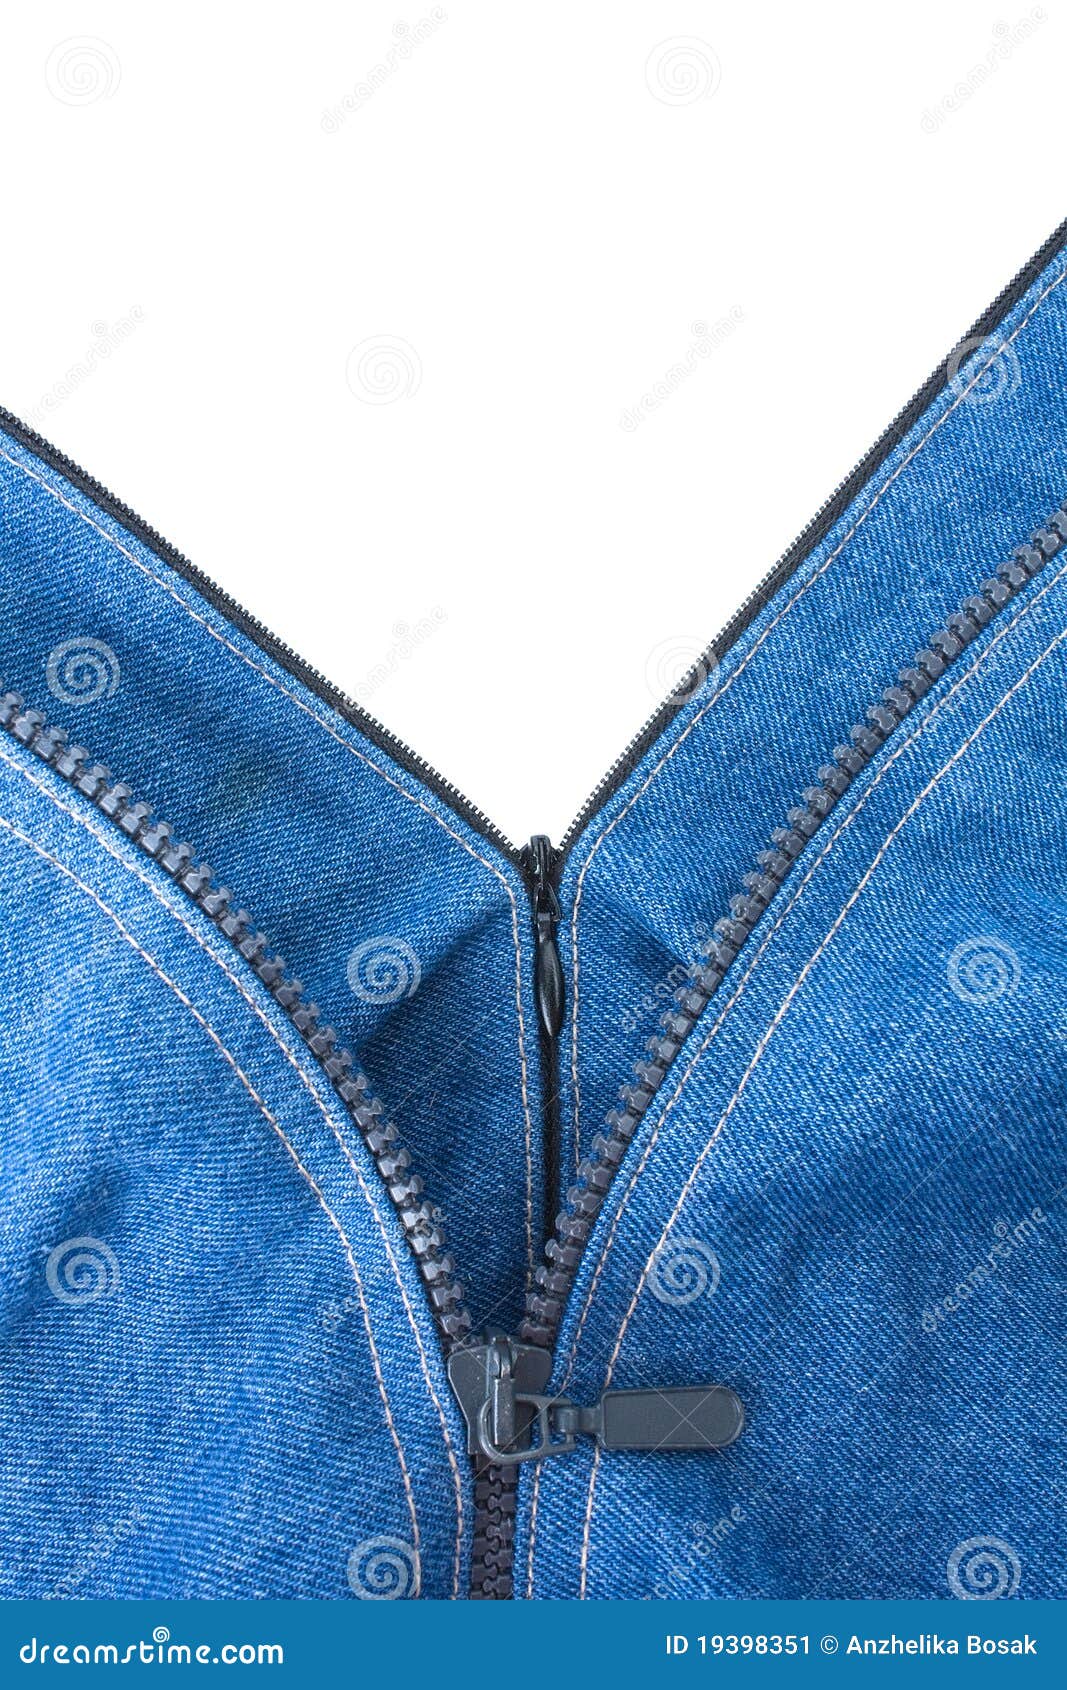 Two zippers on a jeans stock image. Image of fabric, close - 19398351